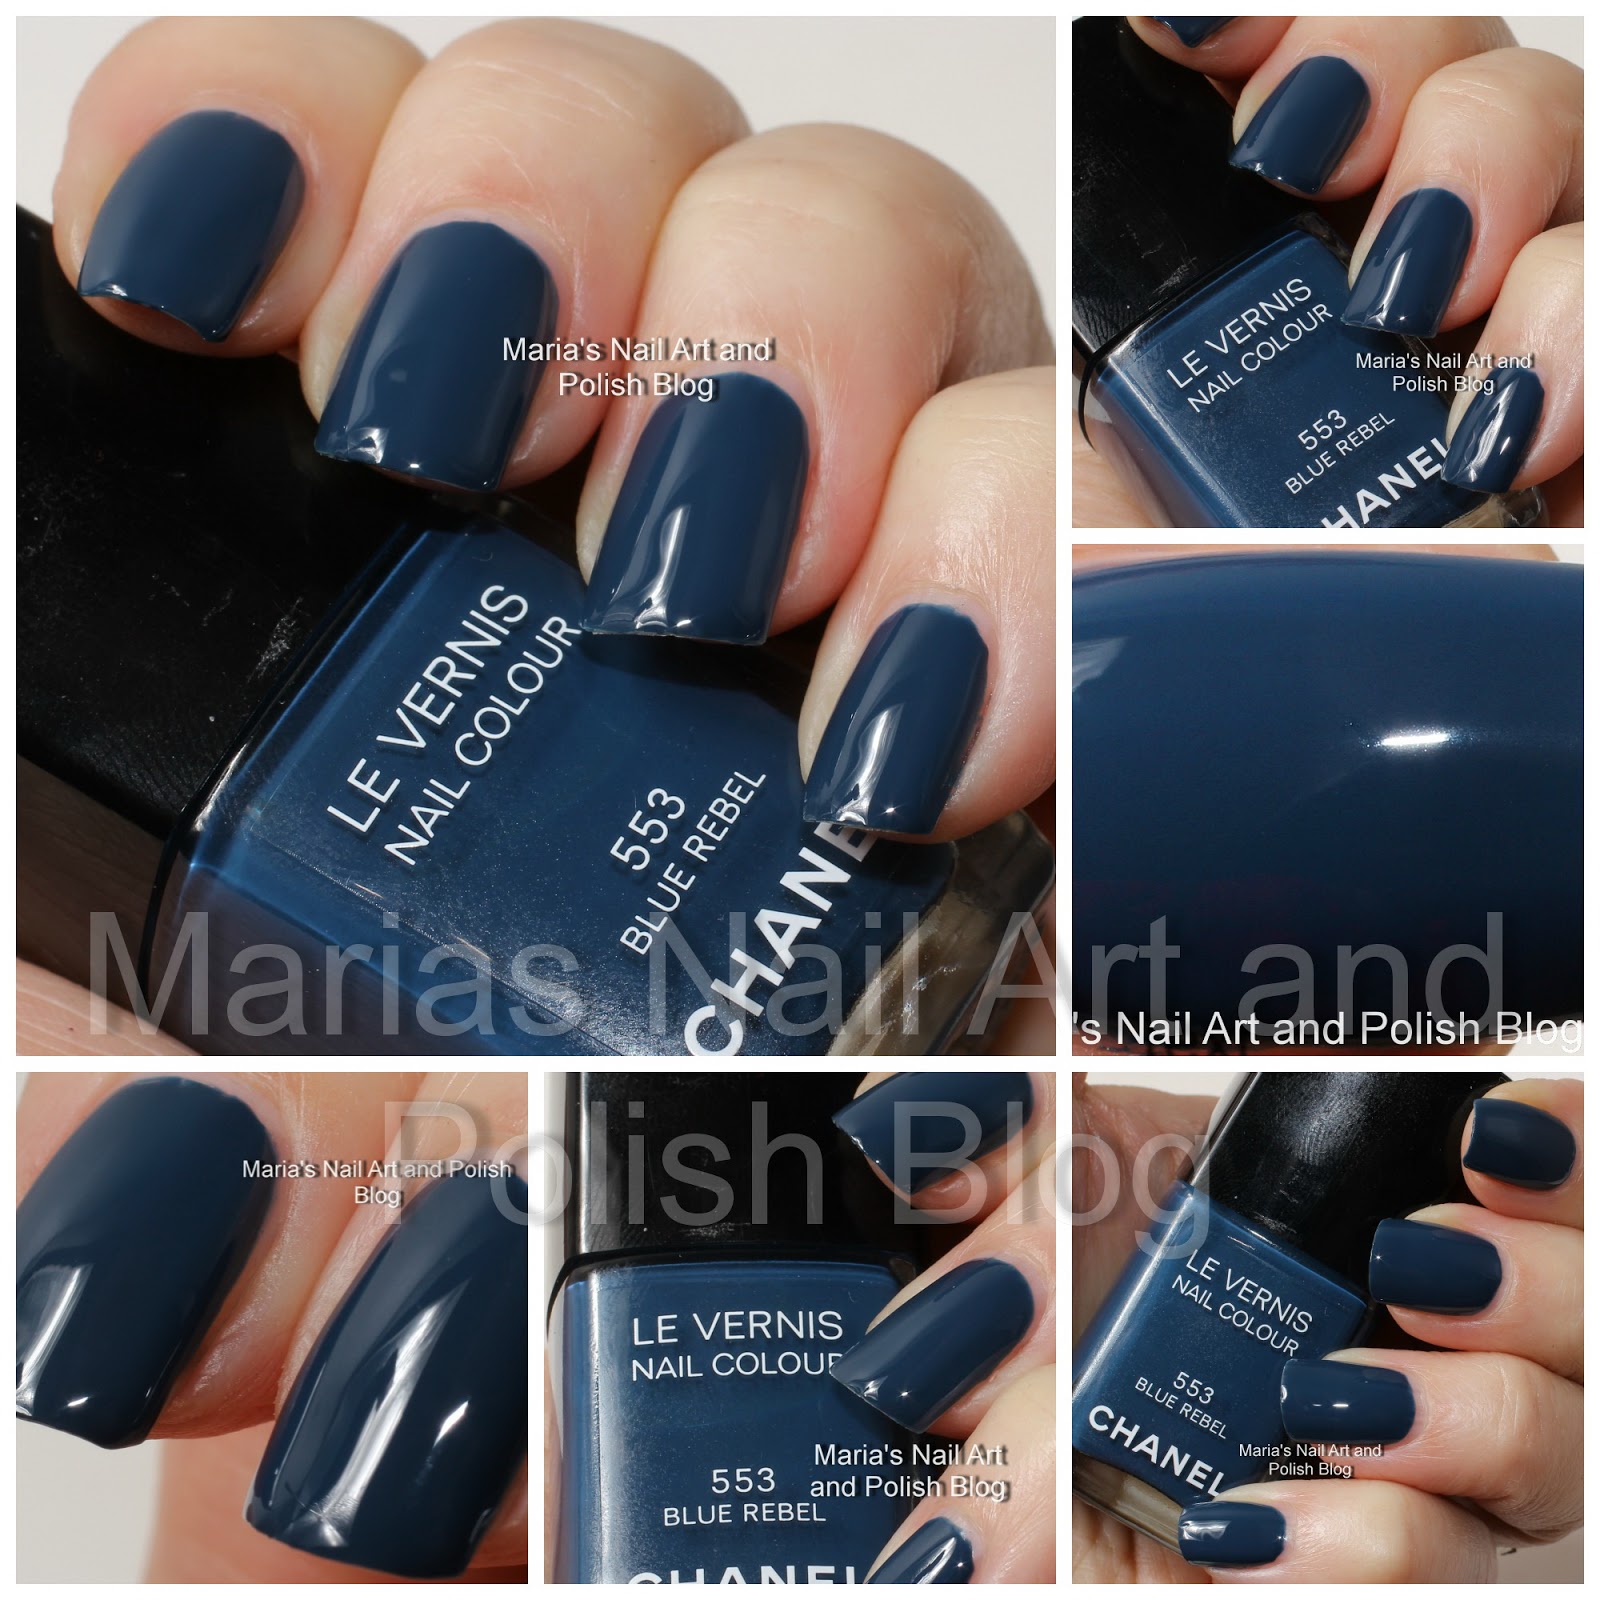 Marias Art and Polish Blog: Blue Rebel, Les Jeans collection swatches and